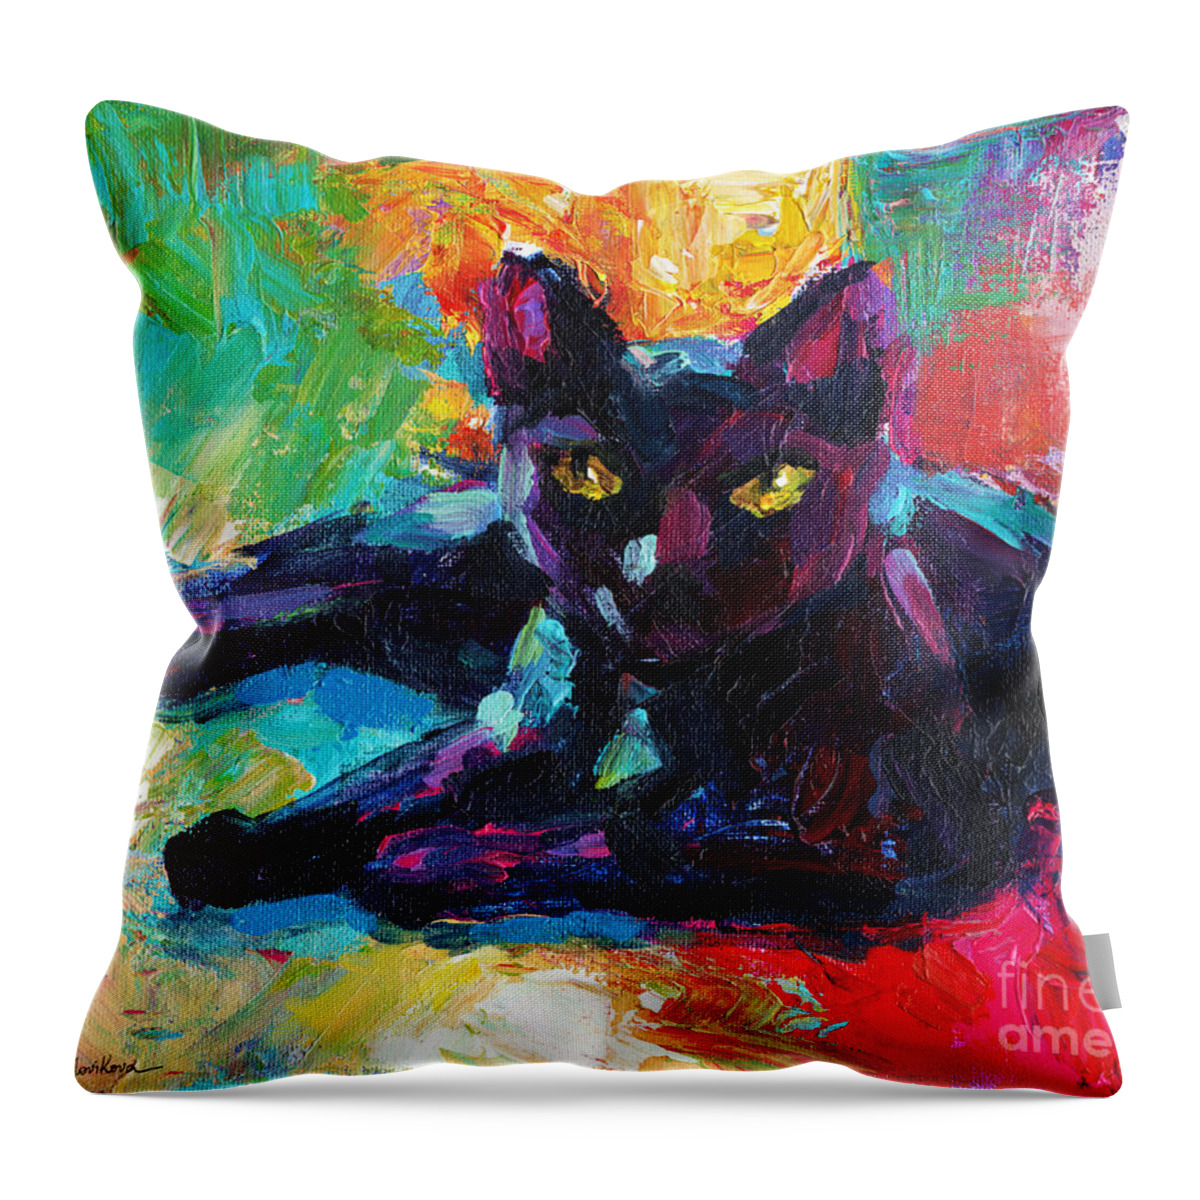 Black Cat Throw Pillow featuring the painting Impressionistic Black Cat painting 2 by Svetlana Novikova